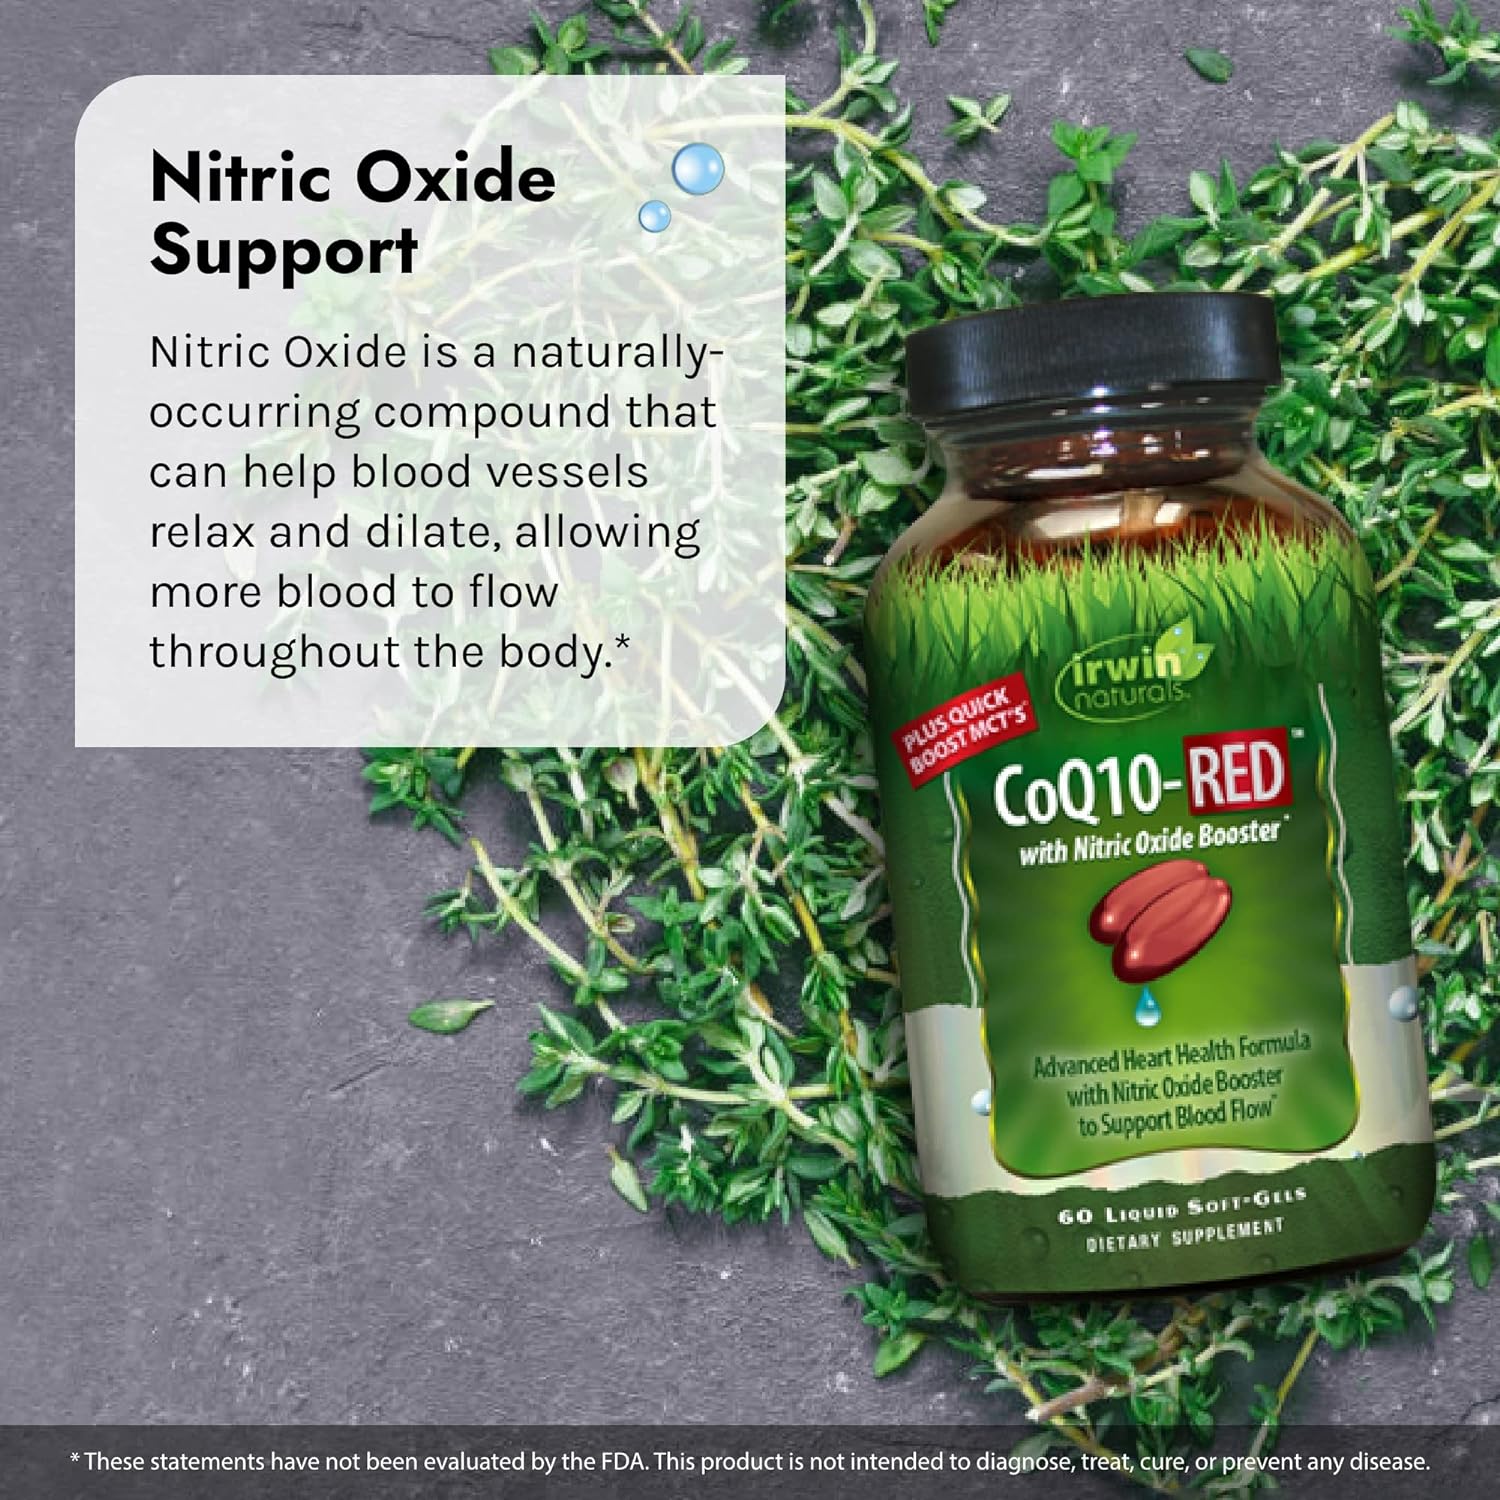 Irwin Naturals CoQ10-RED with Nitric Oxide Booster & MCTs - Advanced Heart Health Formula Supports Healthy Blood Flow & Energy Production - High Absorption Antioxidant Protection - 60 Liquid Softgels : Health & Household